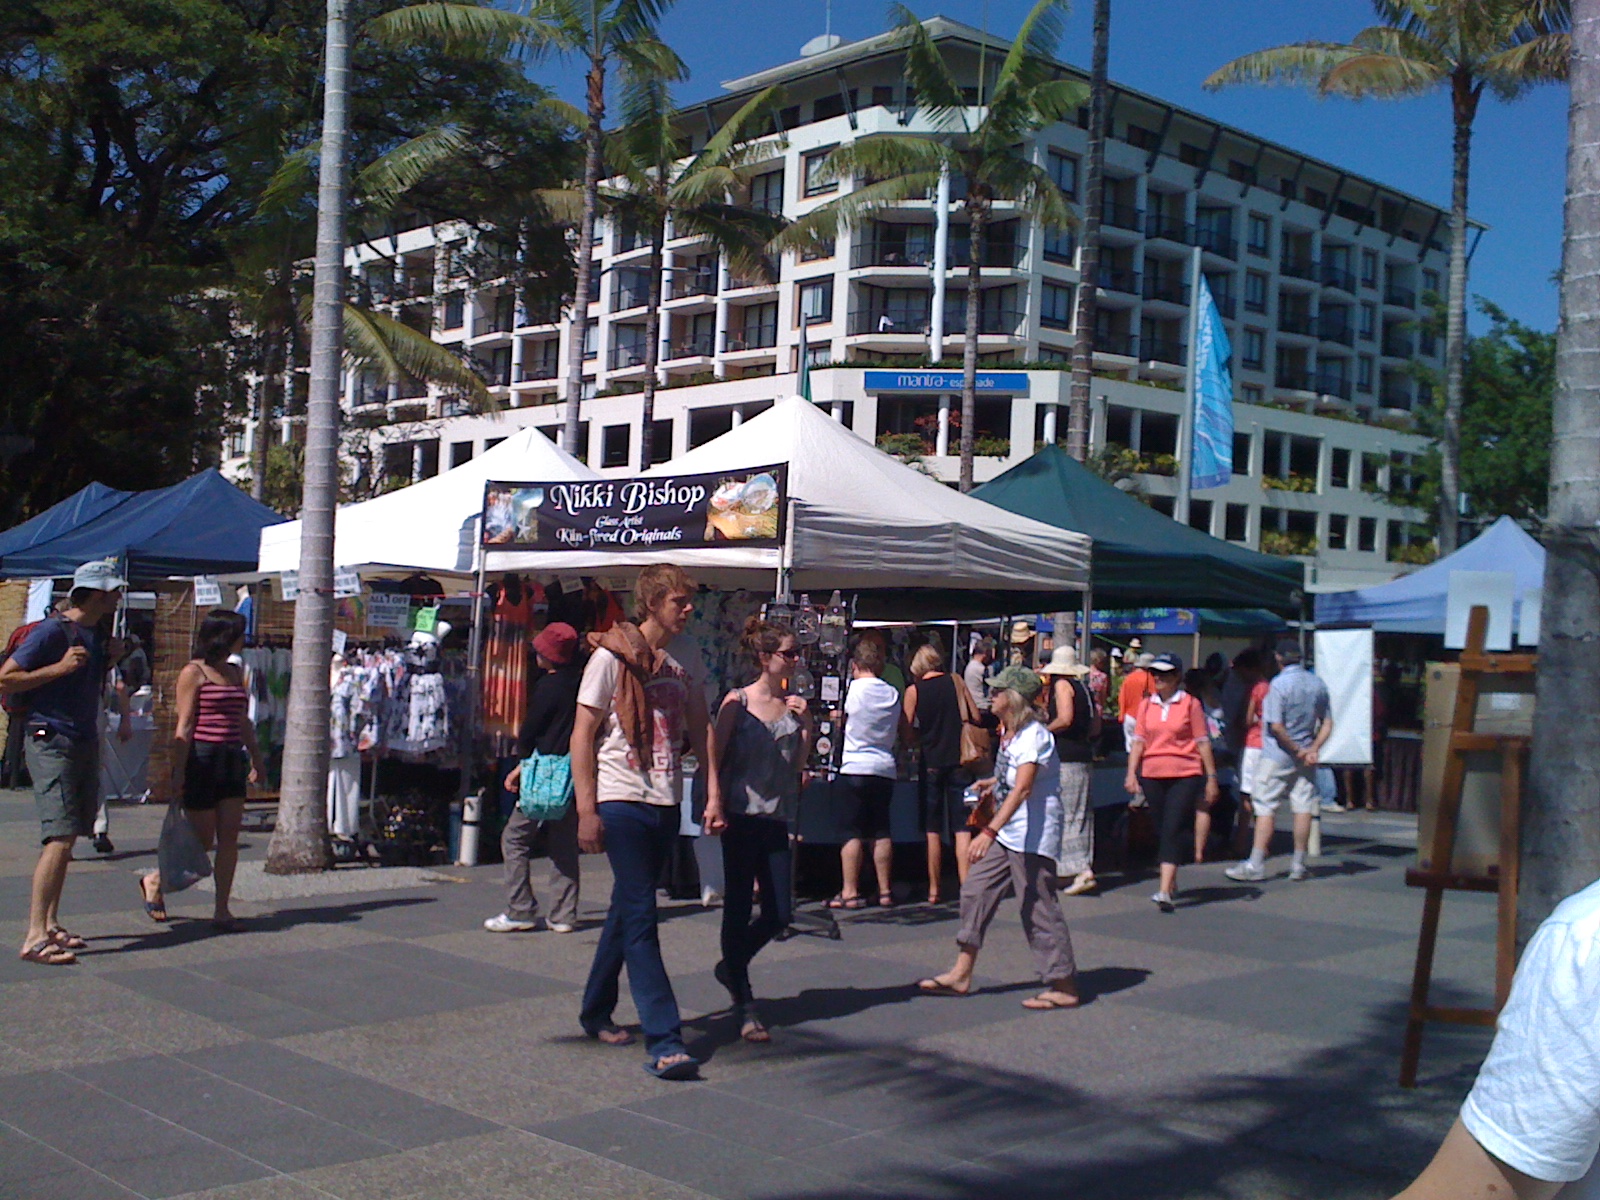 Saturday markets, on the Esplanade in the centre of Cairns.